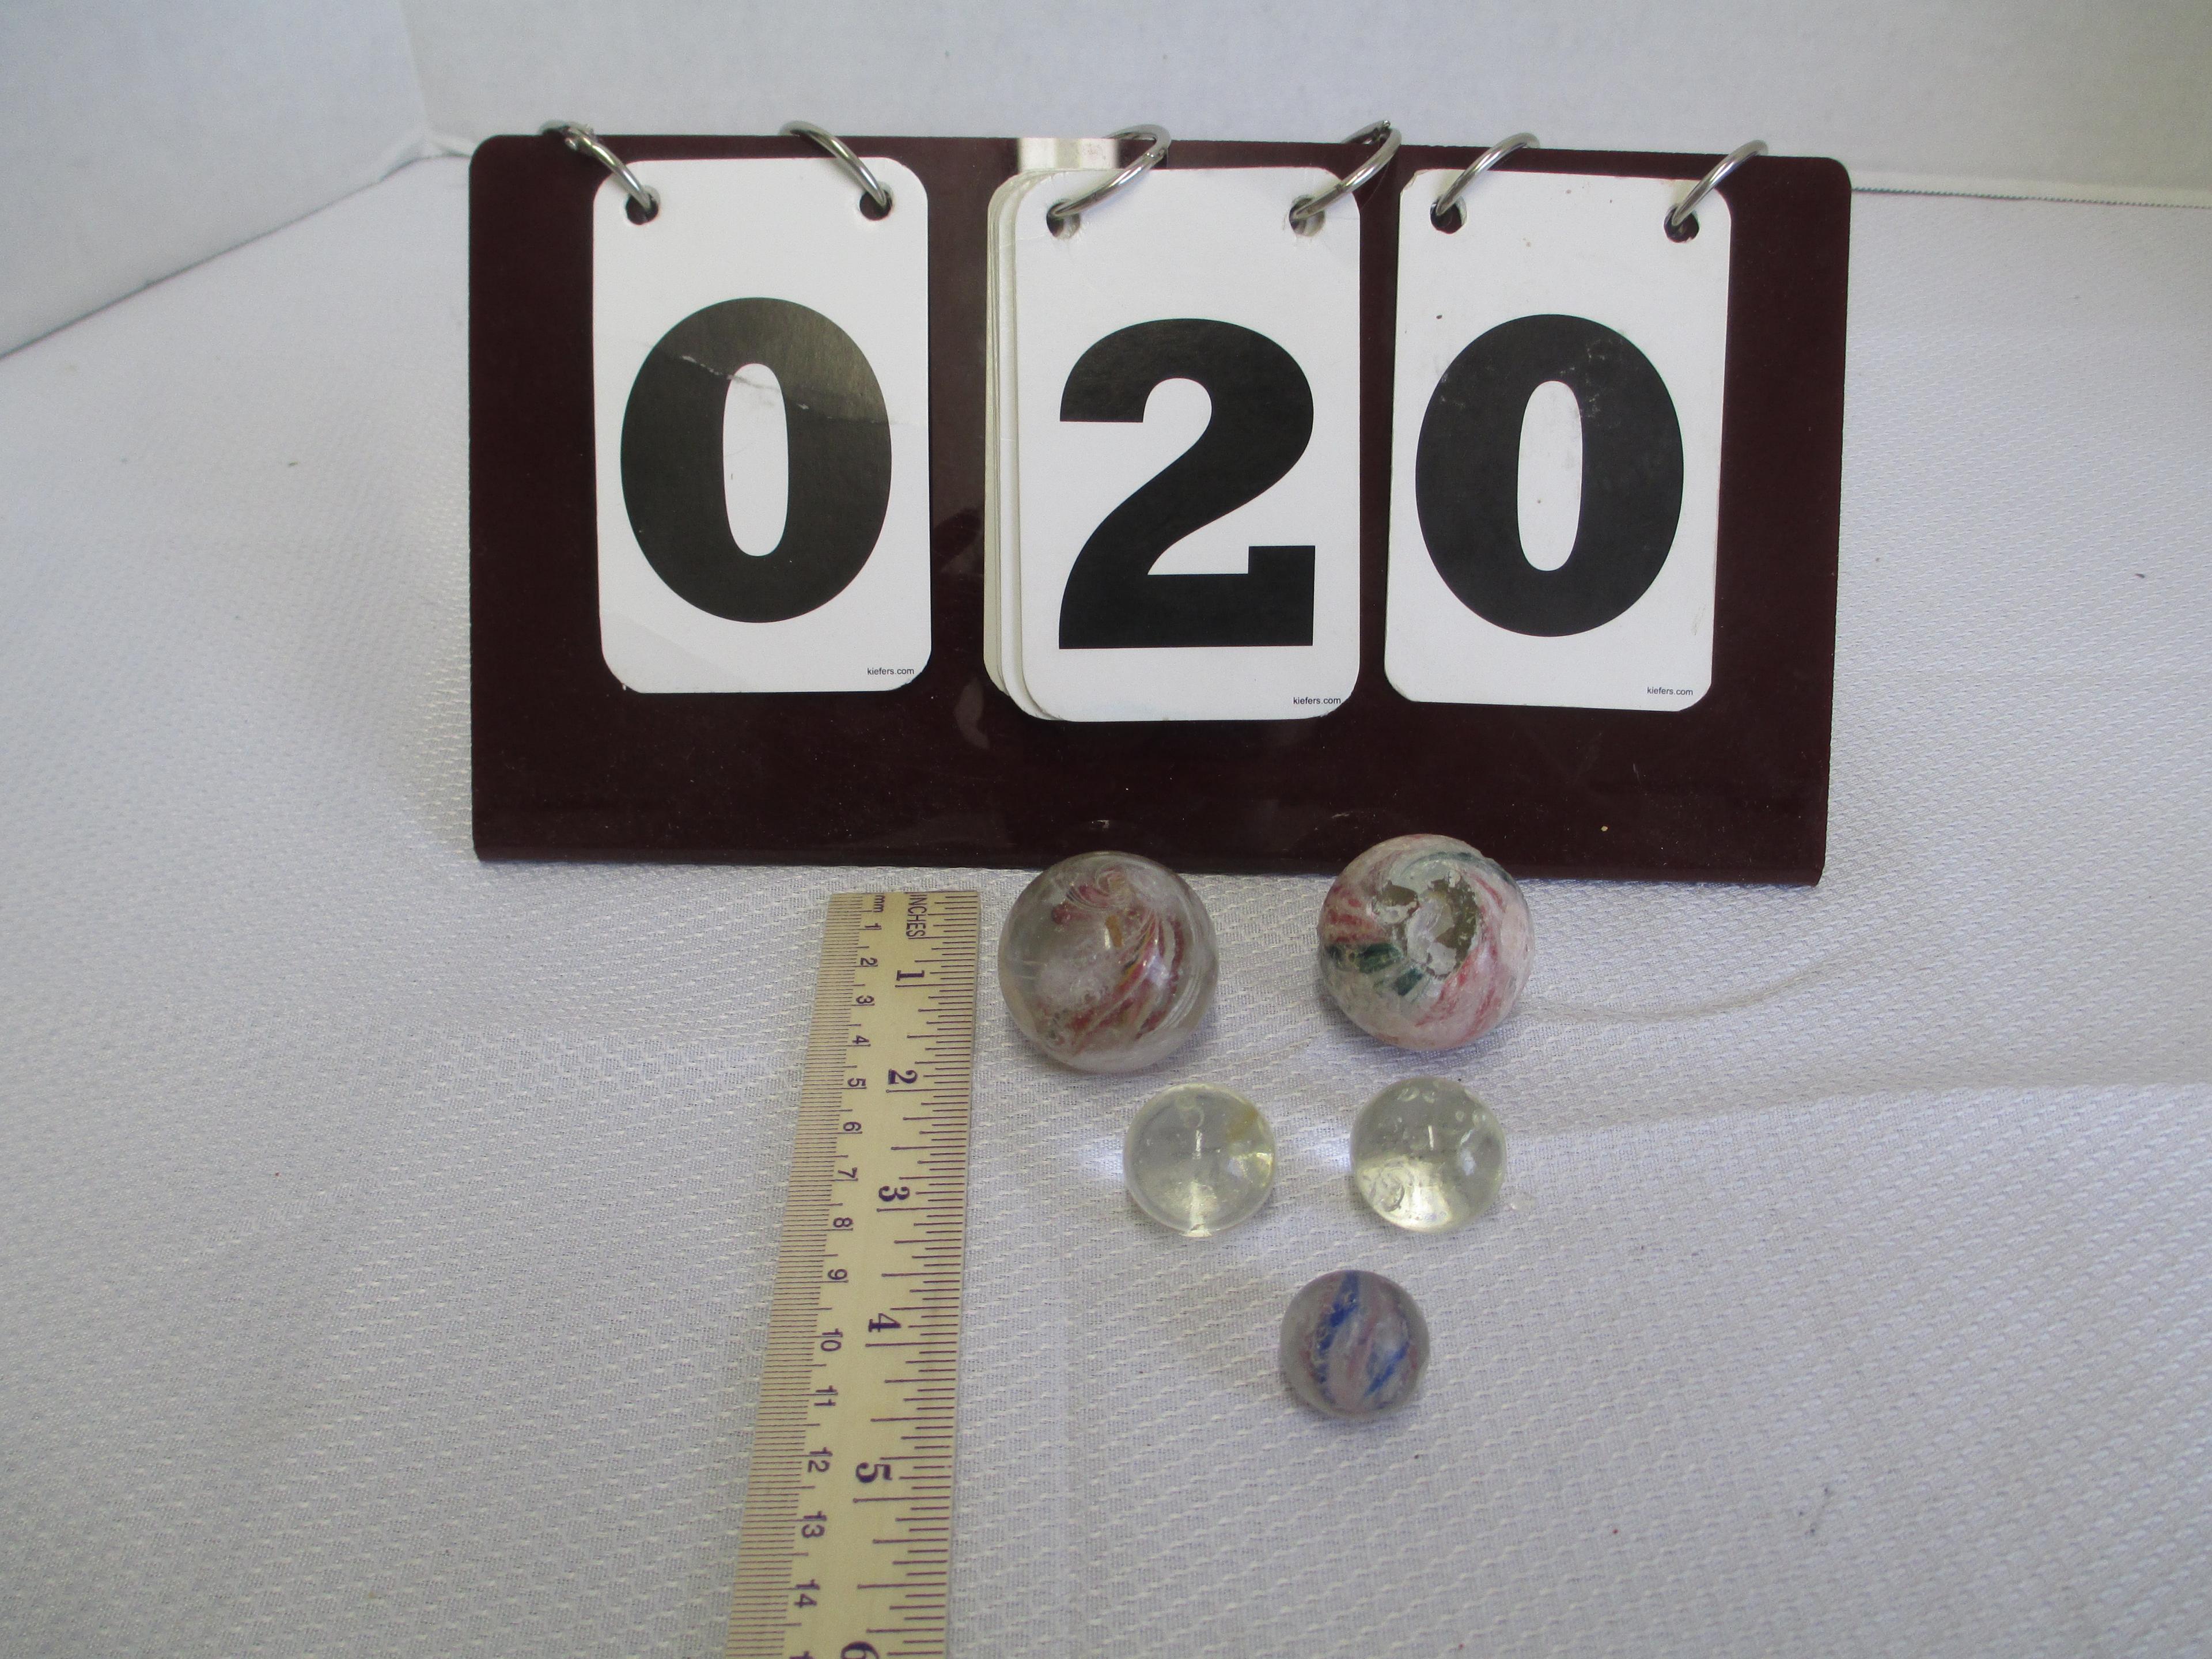 Assortment of Shooter Marbles